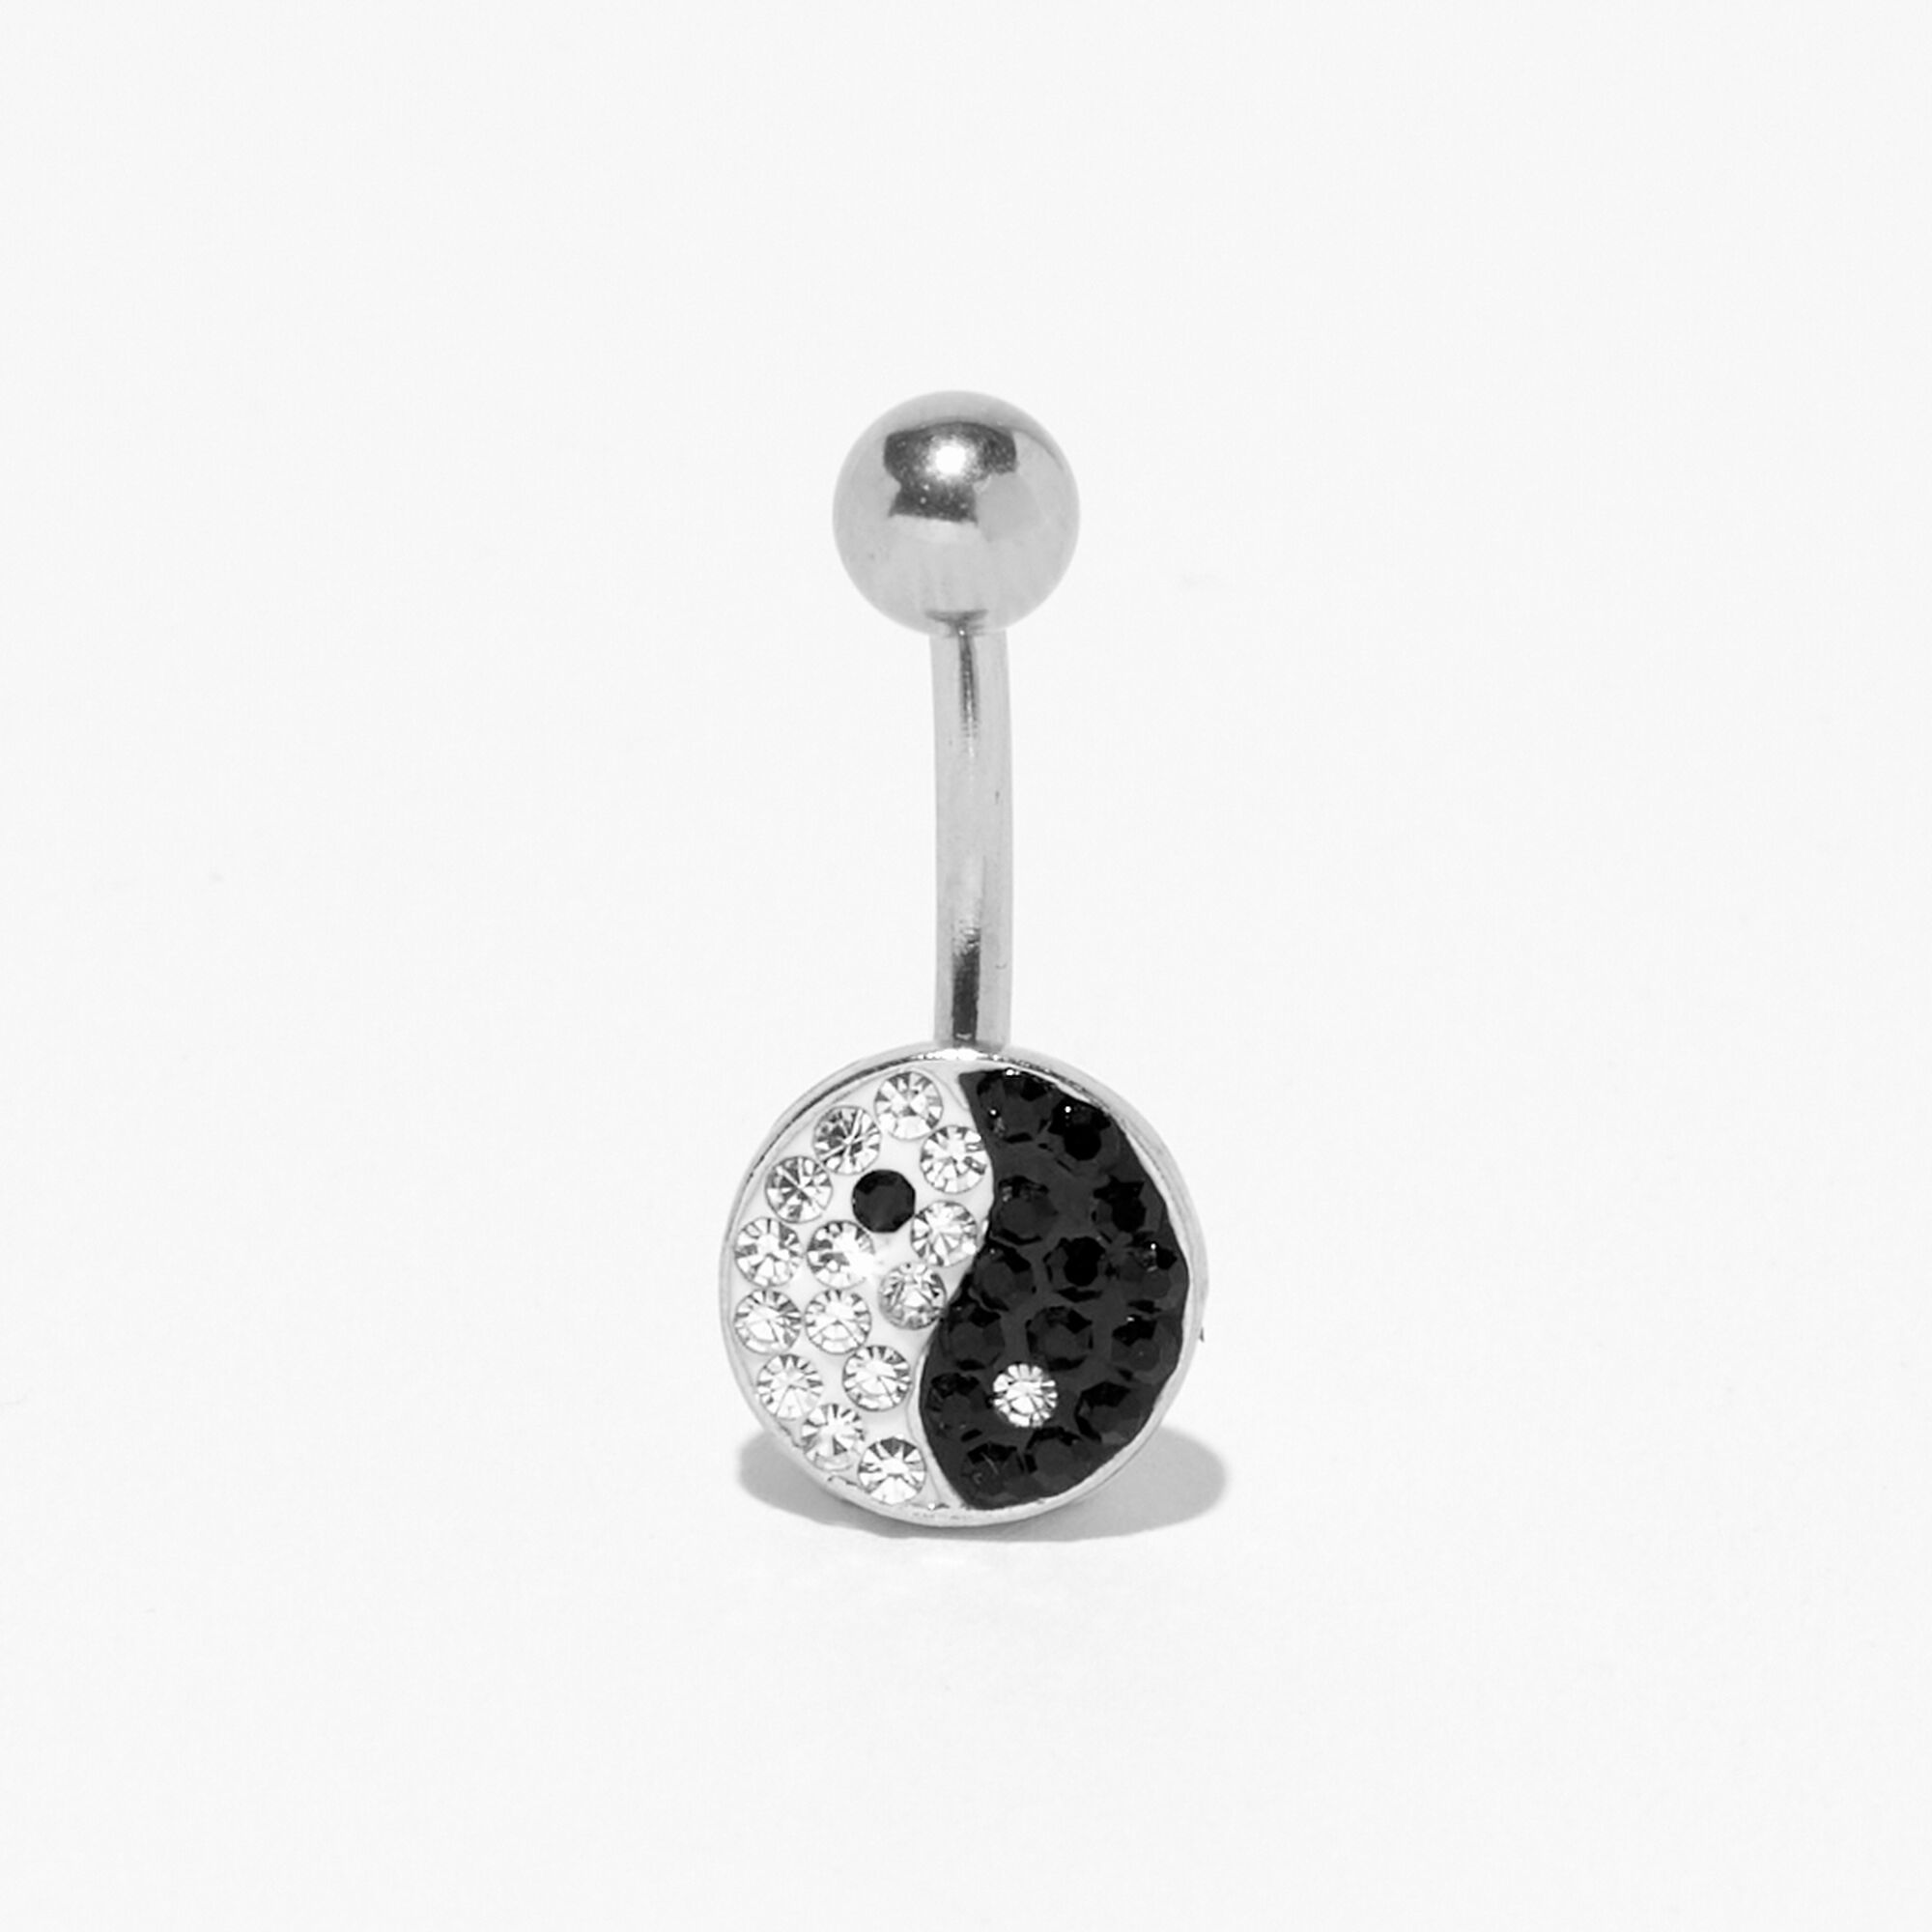 View Claires Tone 14G Embellished Yin Yang Belly Ring Silver information